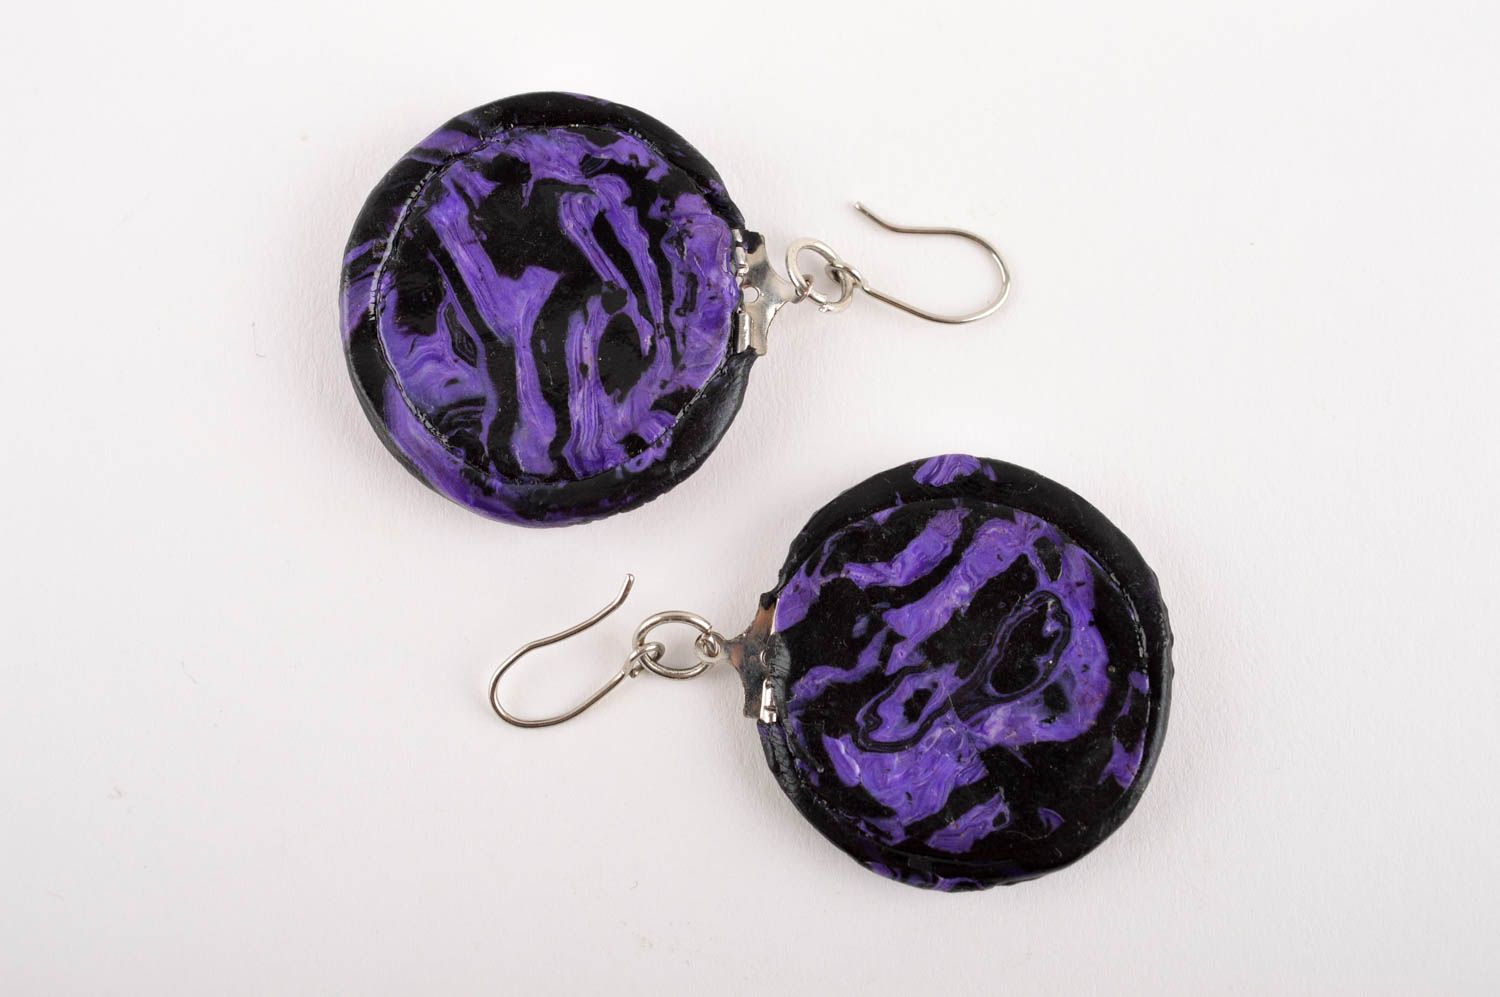 Handmade plastic earrings design round earrings polymer clay ideas gifts for her photo 5